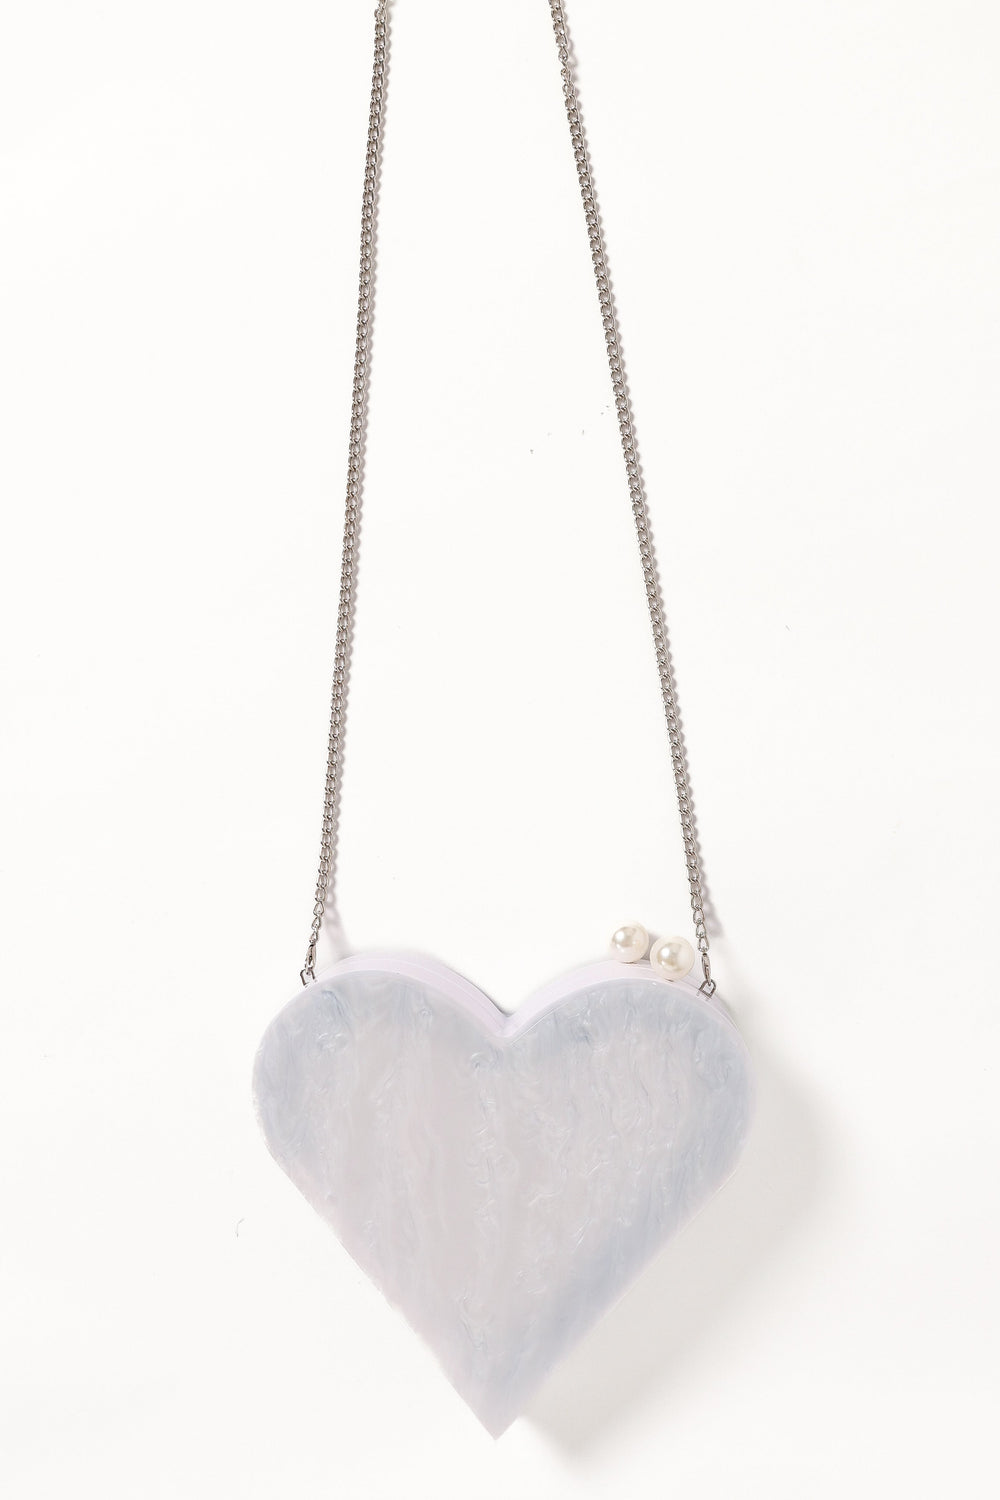 ACCESSORIES Heart Shaped Bag - White